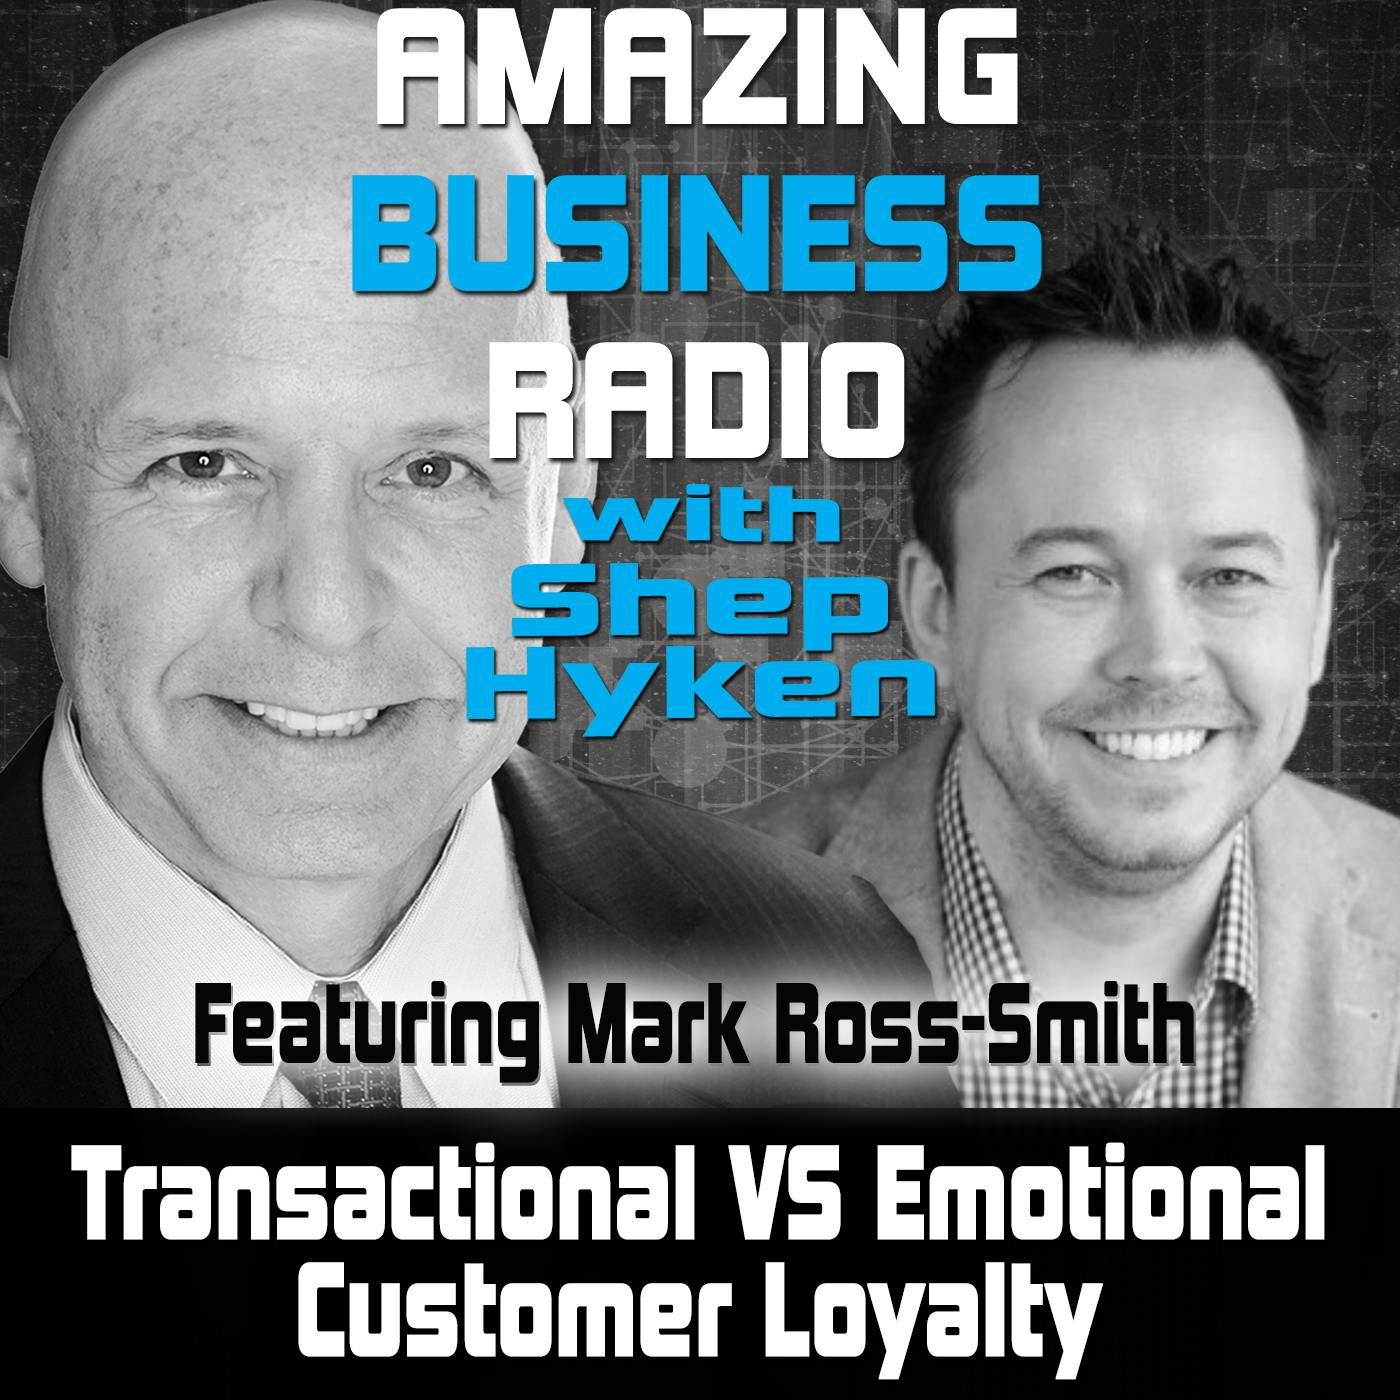 Transactional VS Emotional Customer Loyalty Featuring Mark Ross-Smith